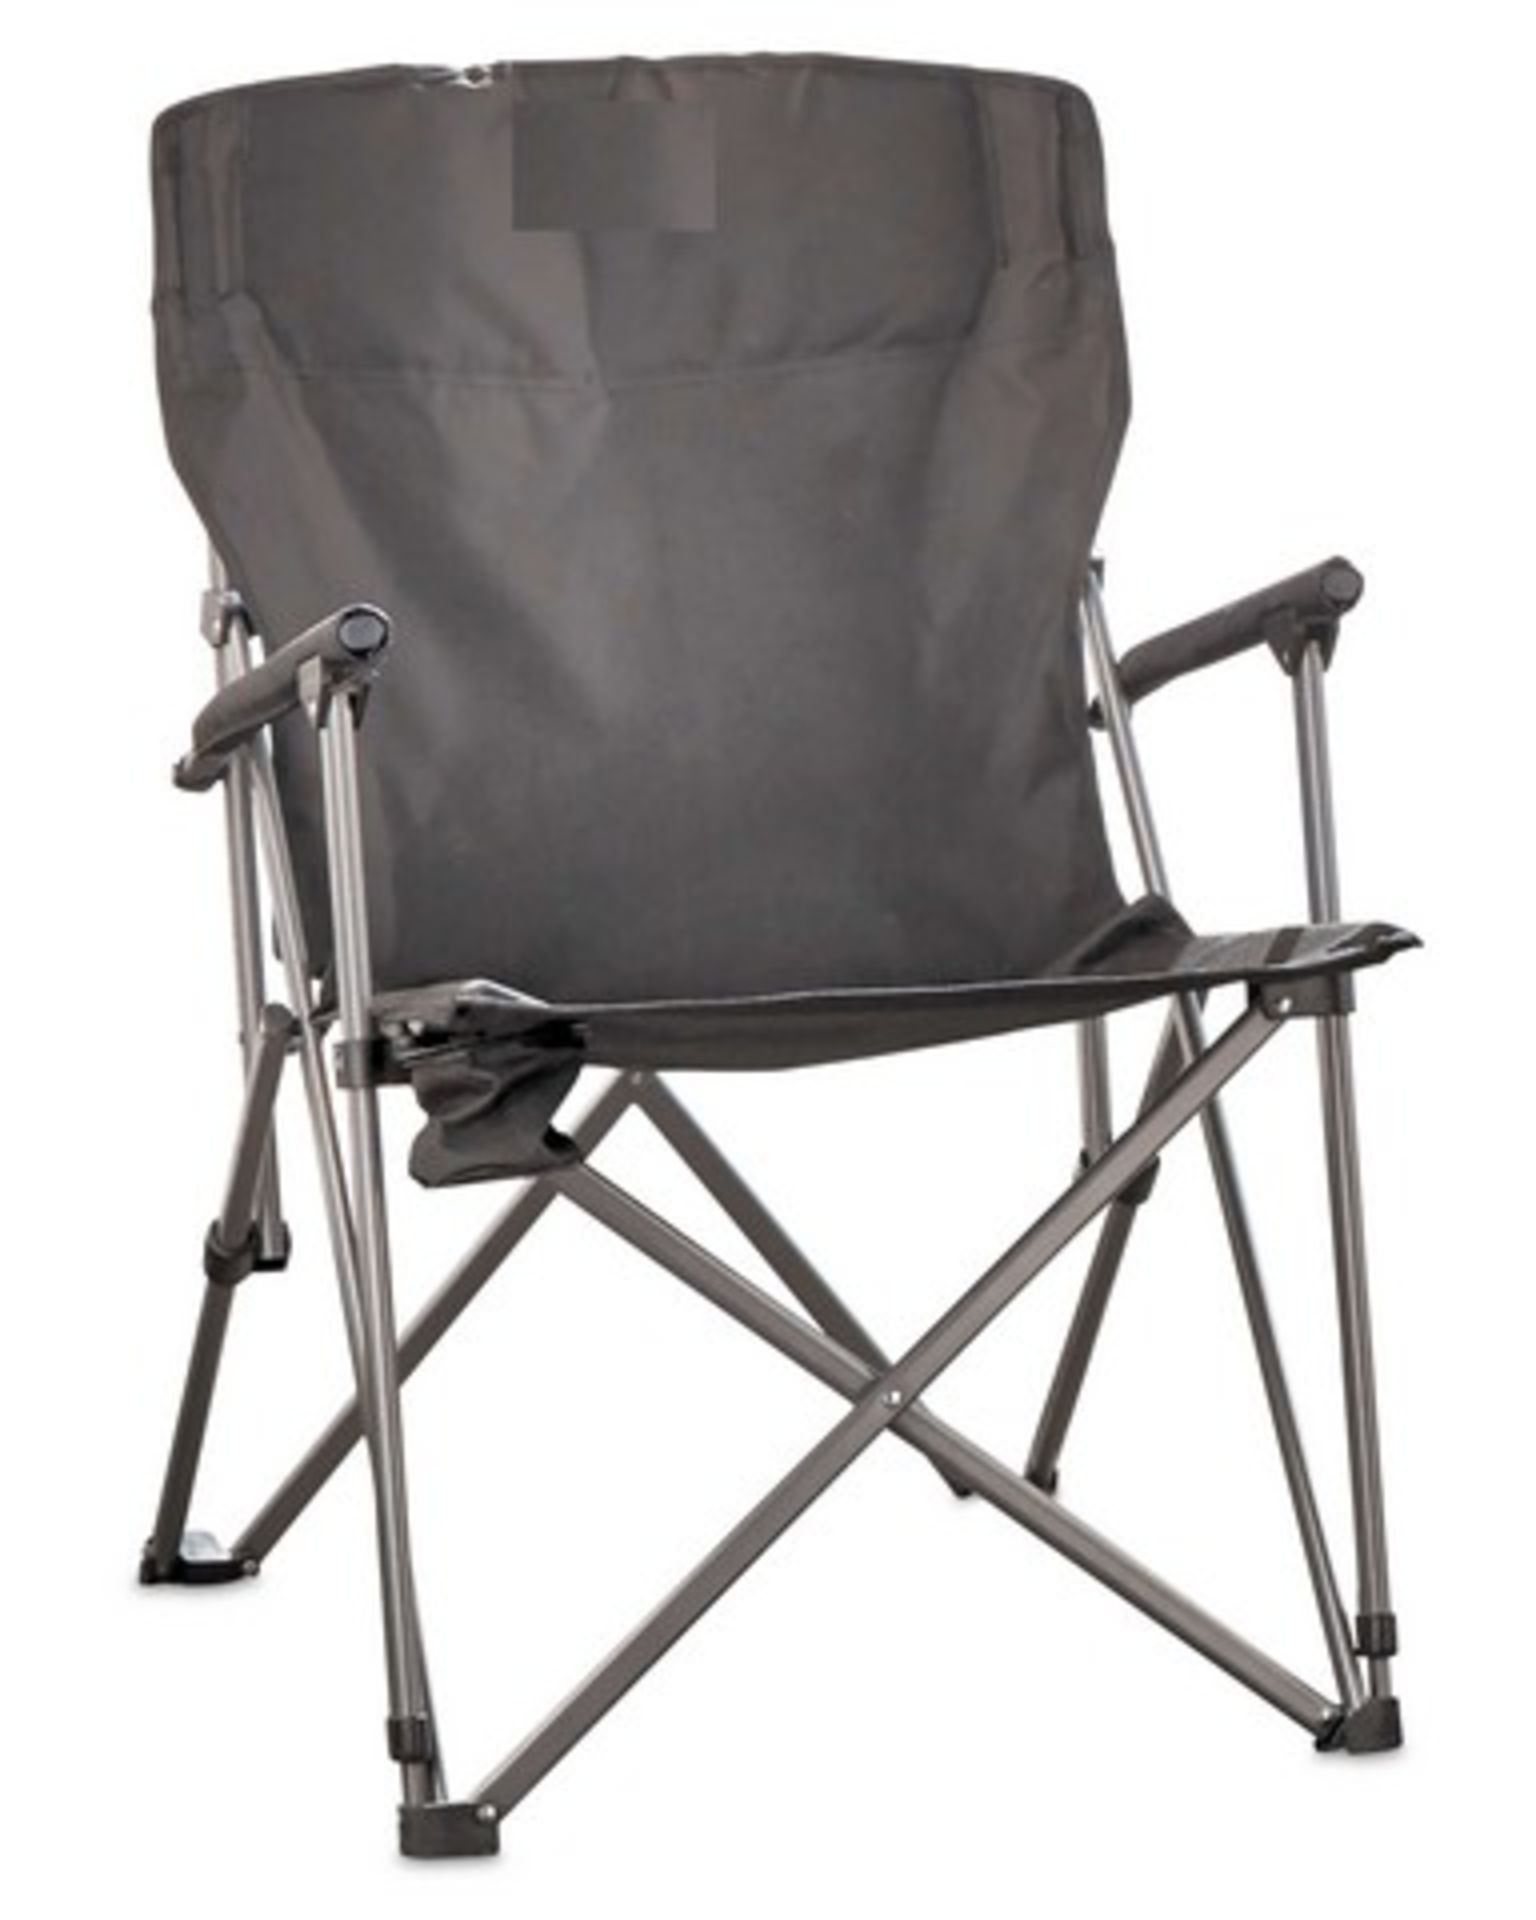 V Brand New Expedition/Tourer Chair In Silver/Black With Carry Case - Lightweight Steel Frame So - Image 2 of 2